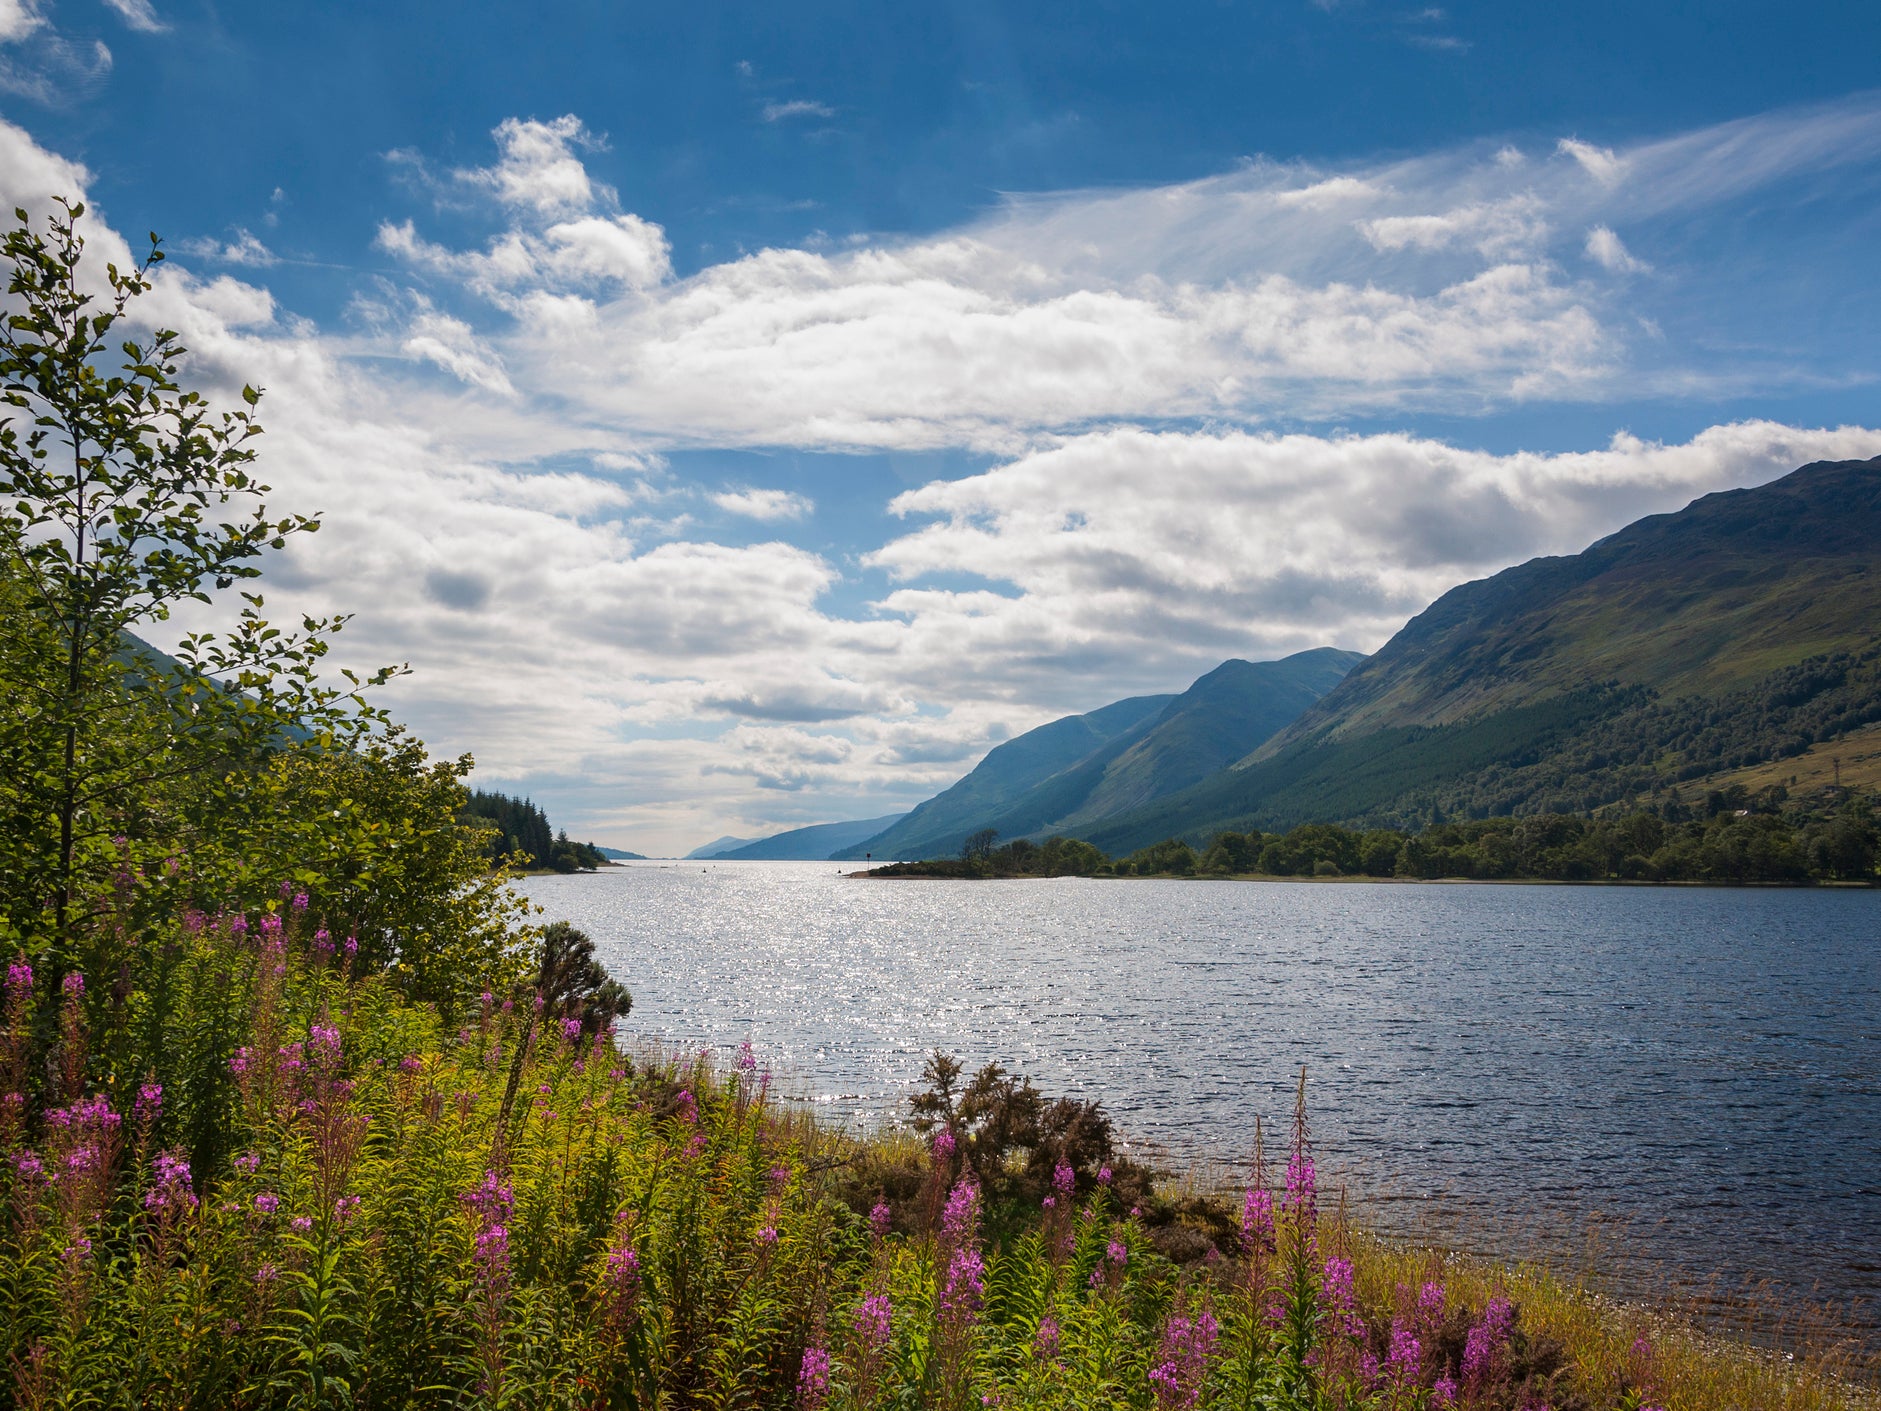 Climate crisis: Green entrepreneur buys 500-acre estate at Loch Ness for rewilding project